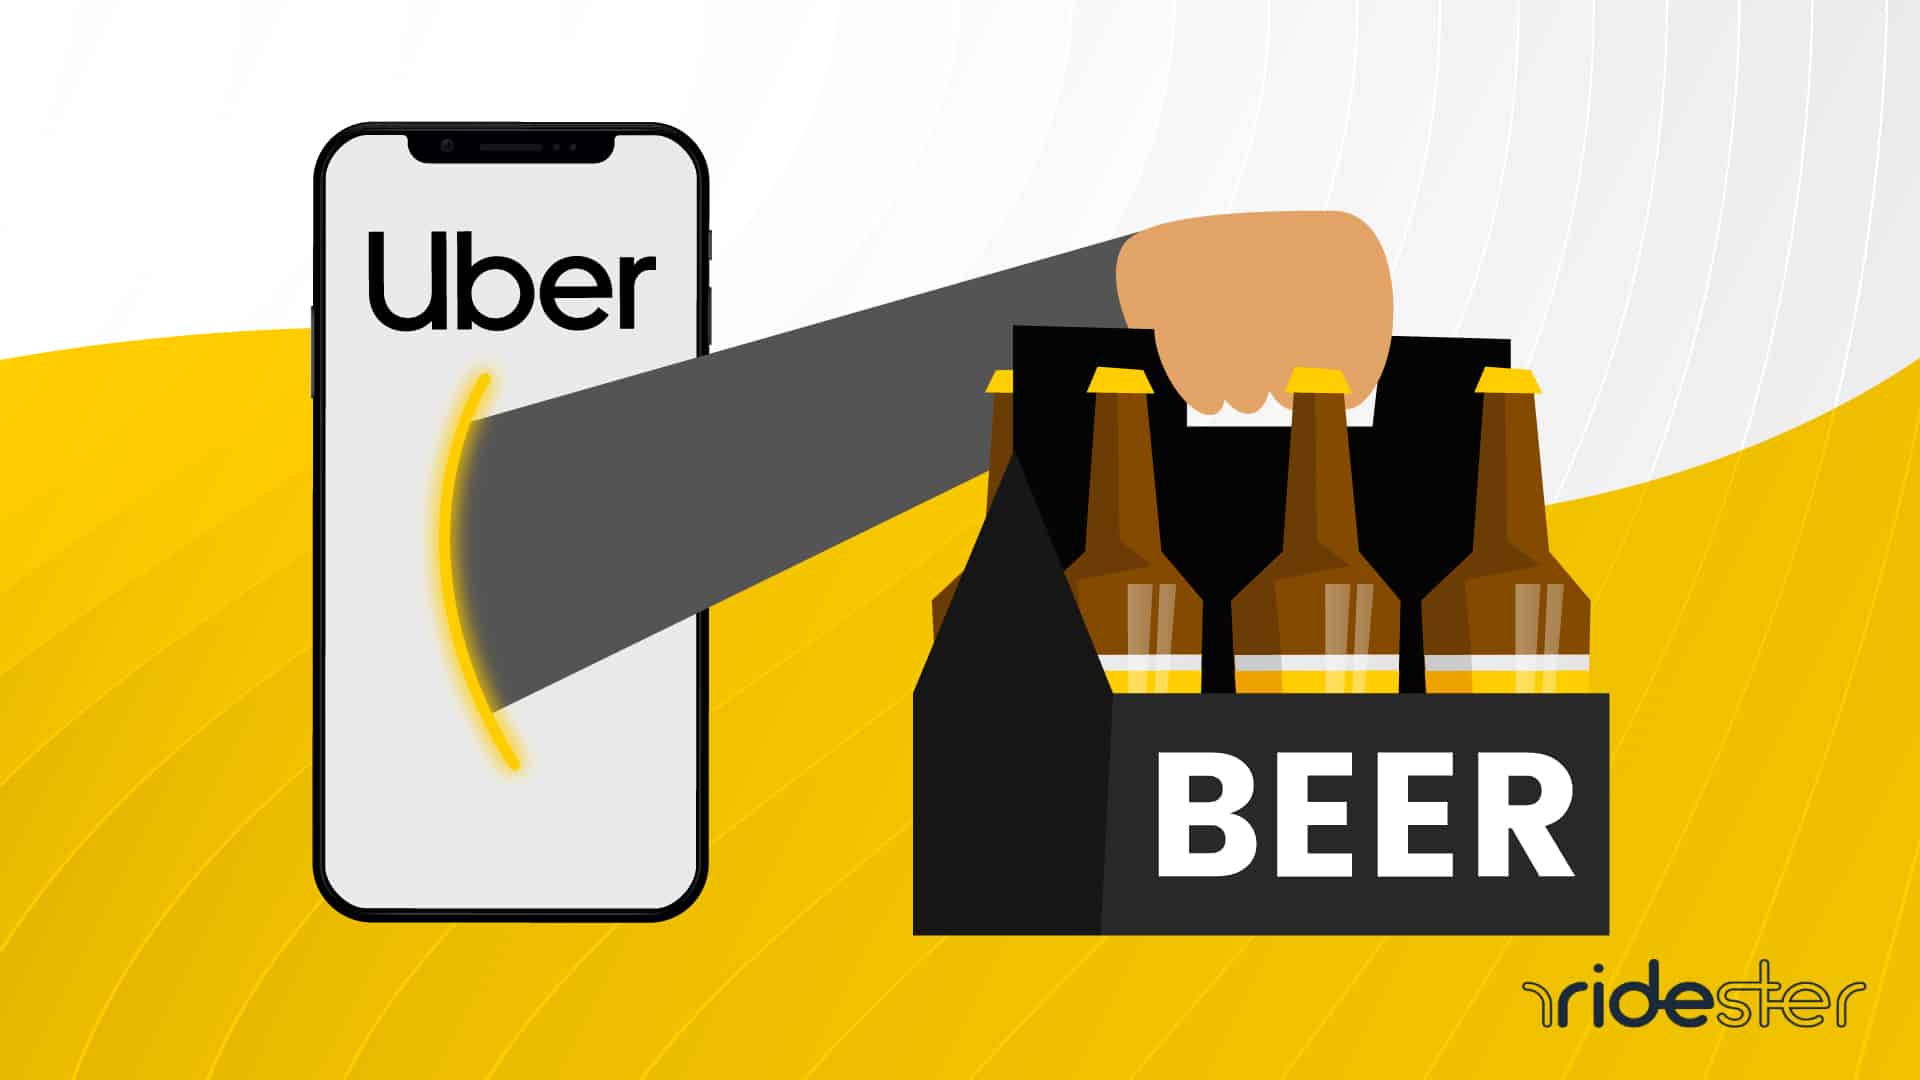 vector illustration of an arm reaching out from a smartphone and grabbing a 6 pack of beer for an uber alcohol delivery